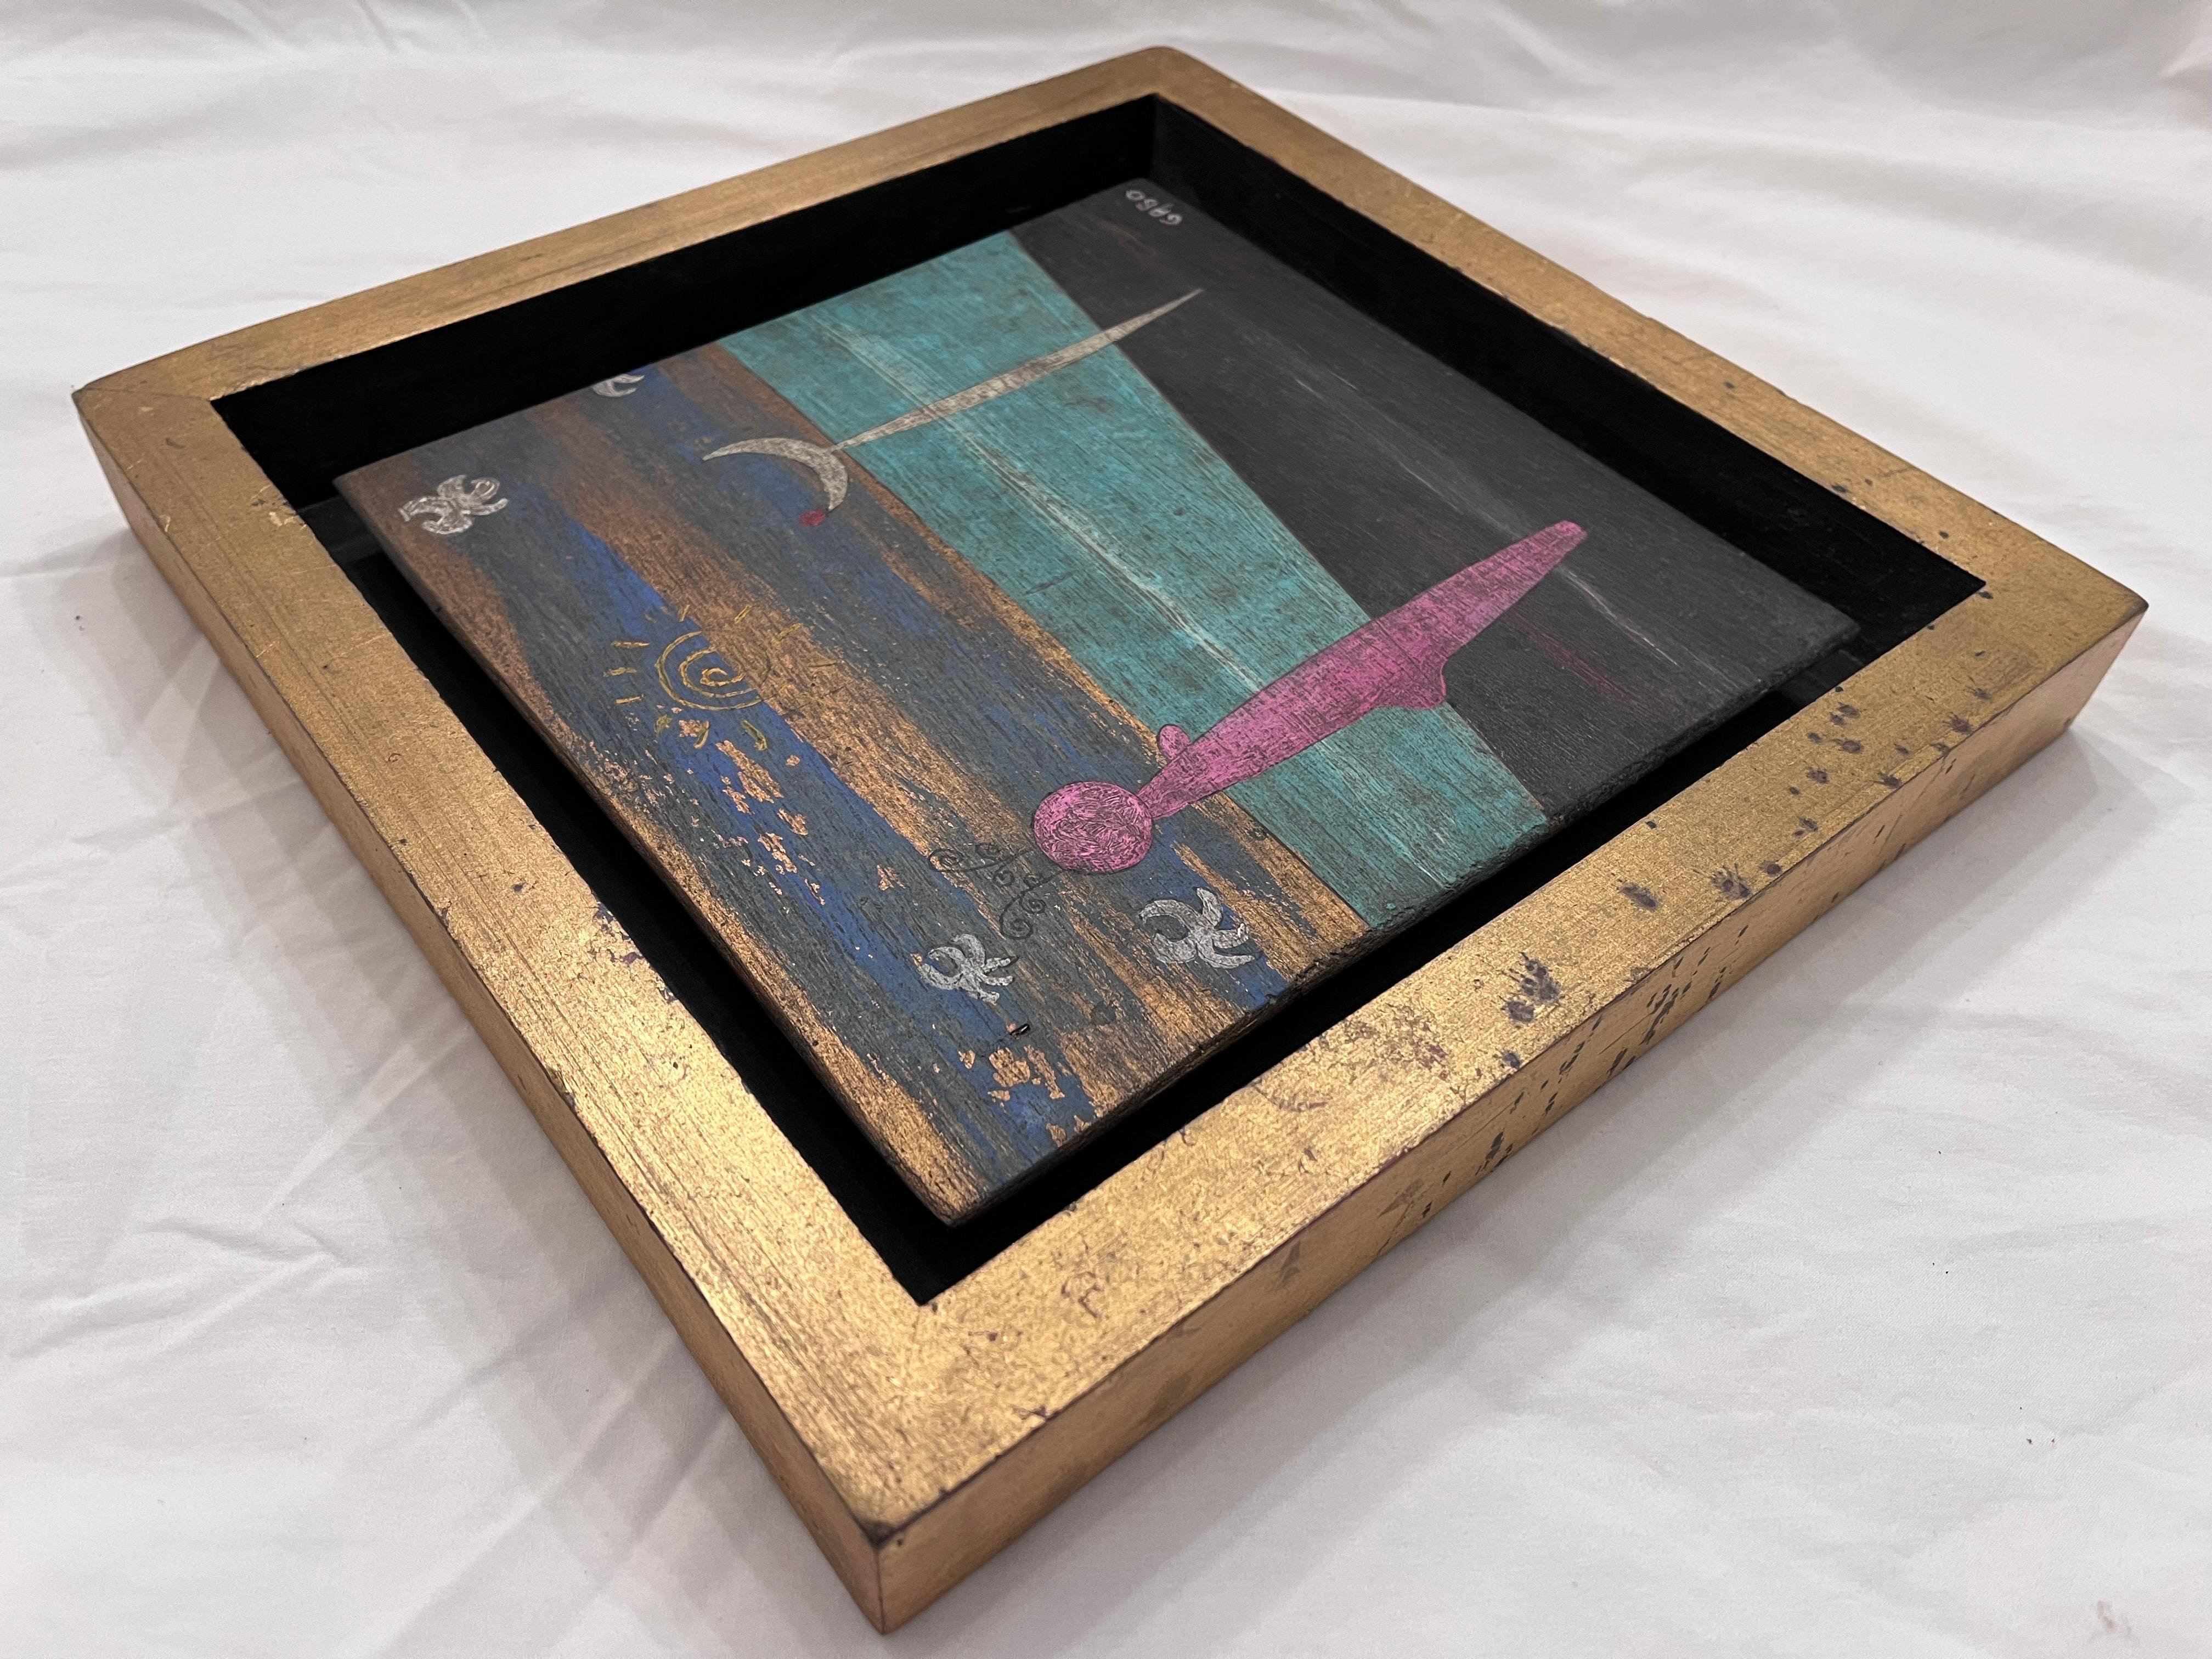 Wood Contemporary Surrealist Painting Signed Gabo in a Gilt Shadowbox Picture Frame